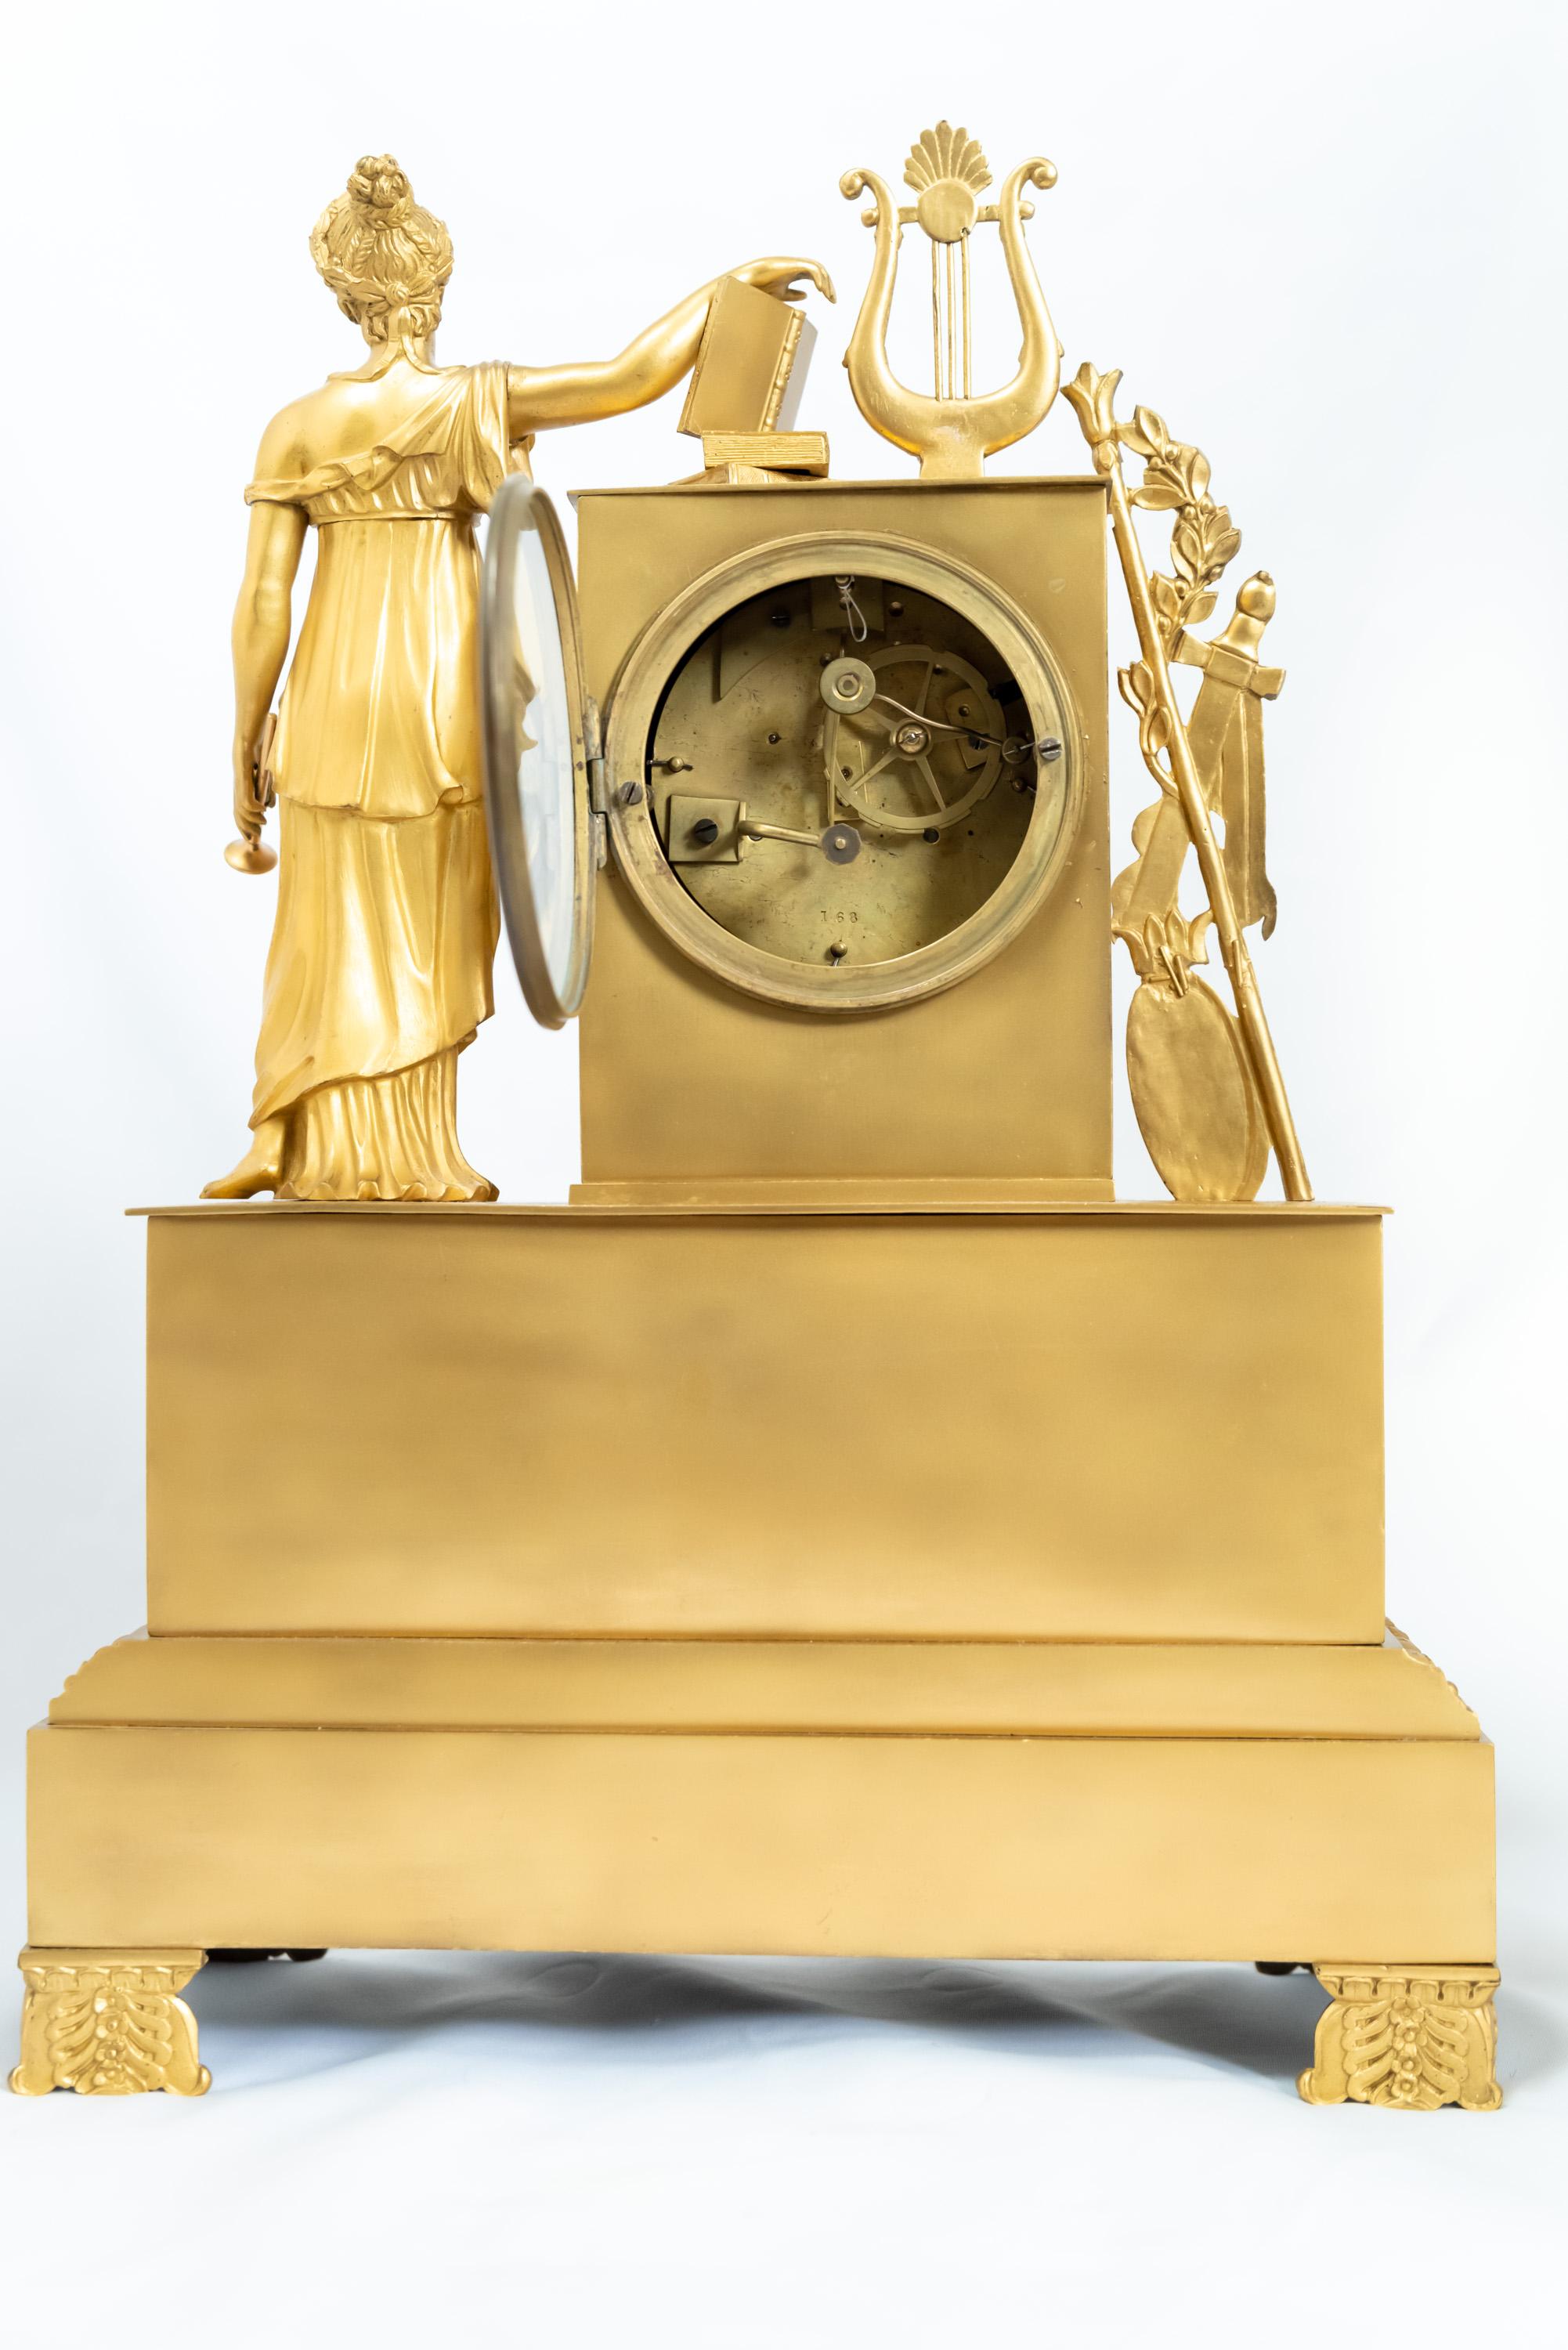 19th Century A Restauration Era Fire-Gilt Mantle Clock with Figures of Venus and Cupid For Sale